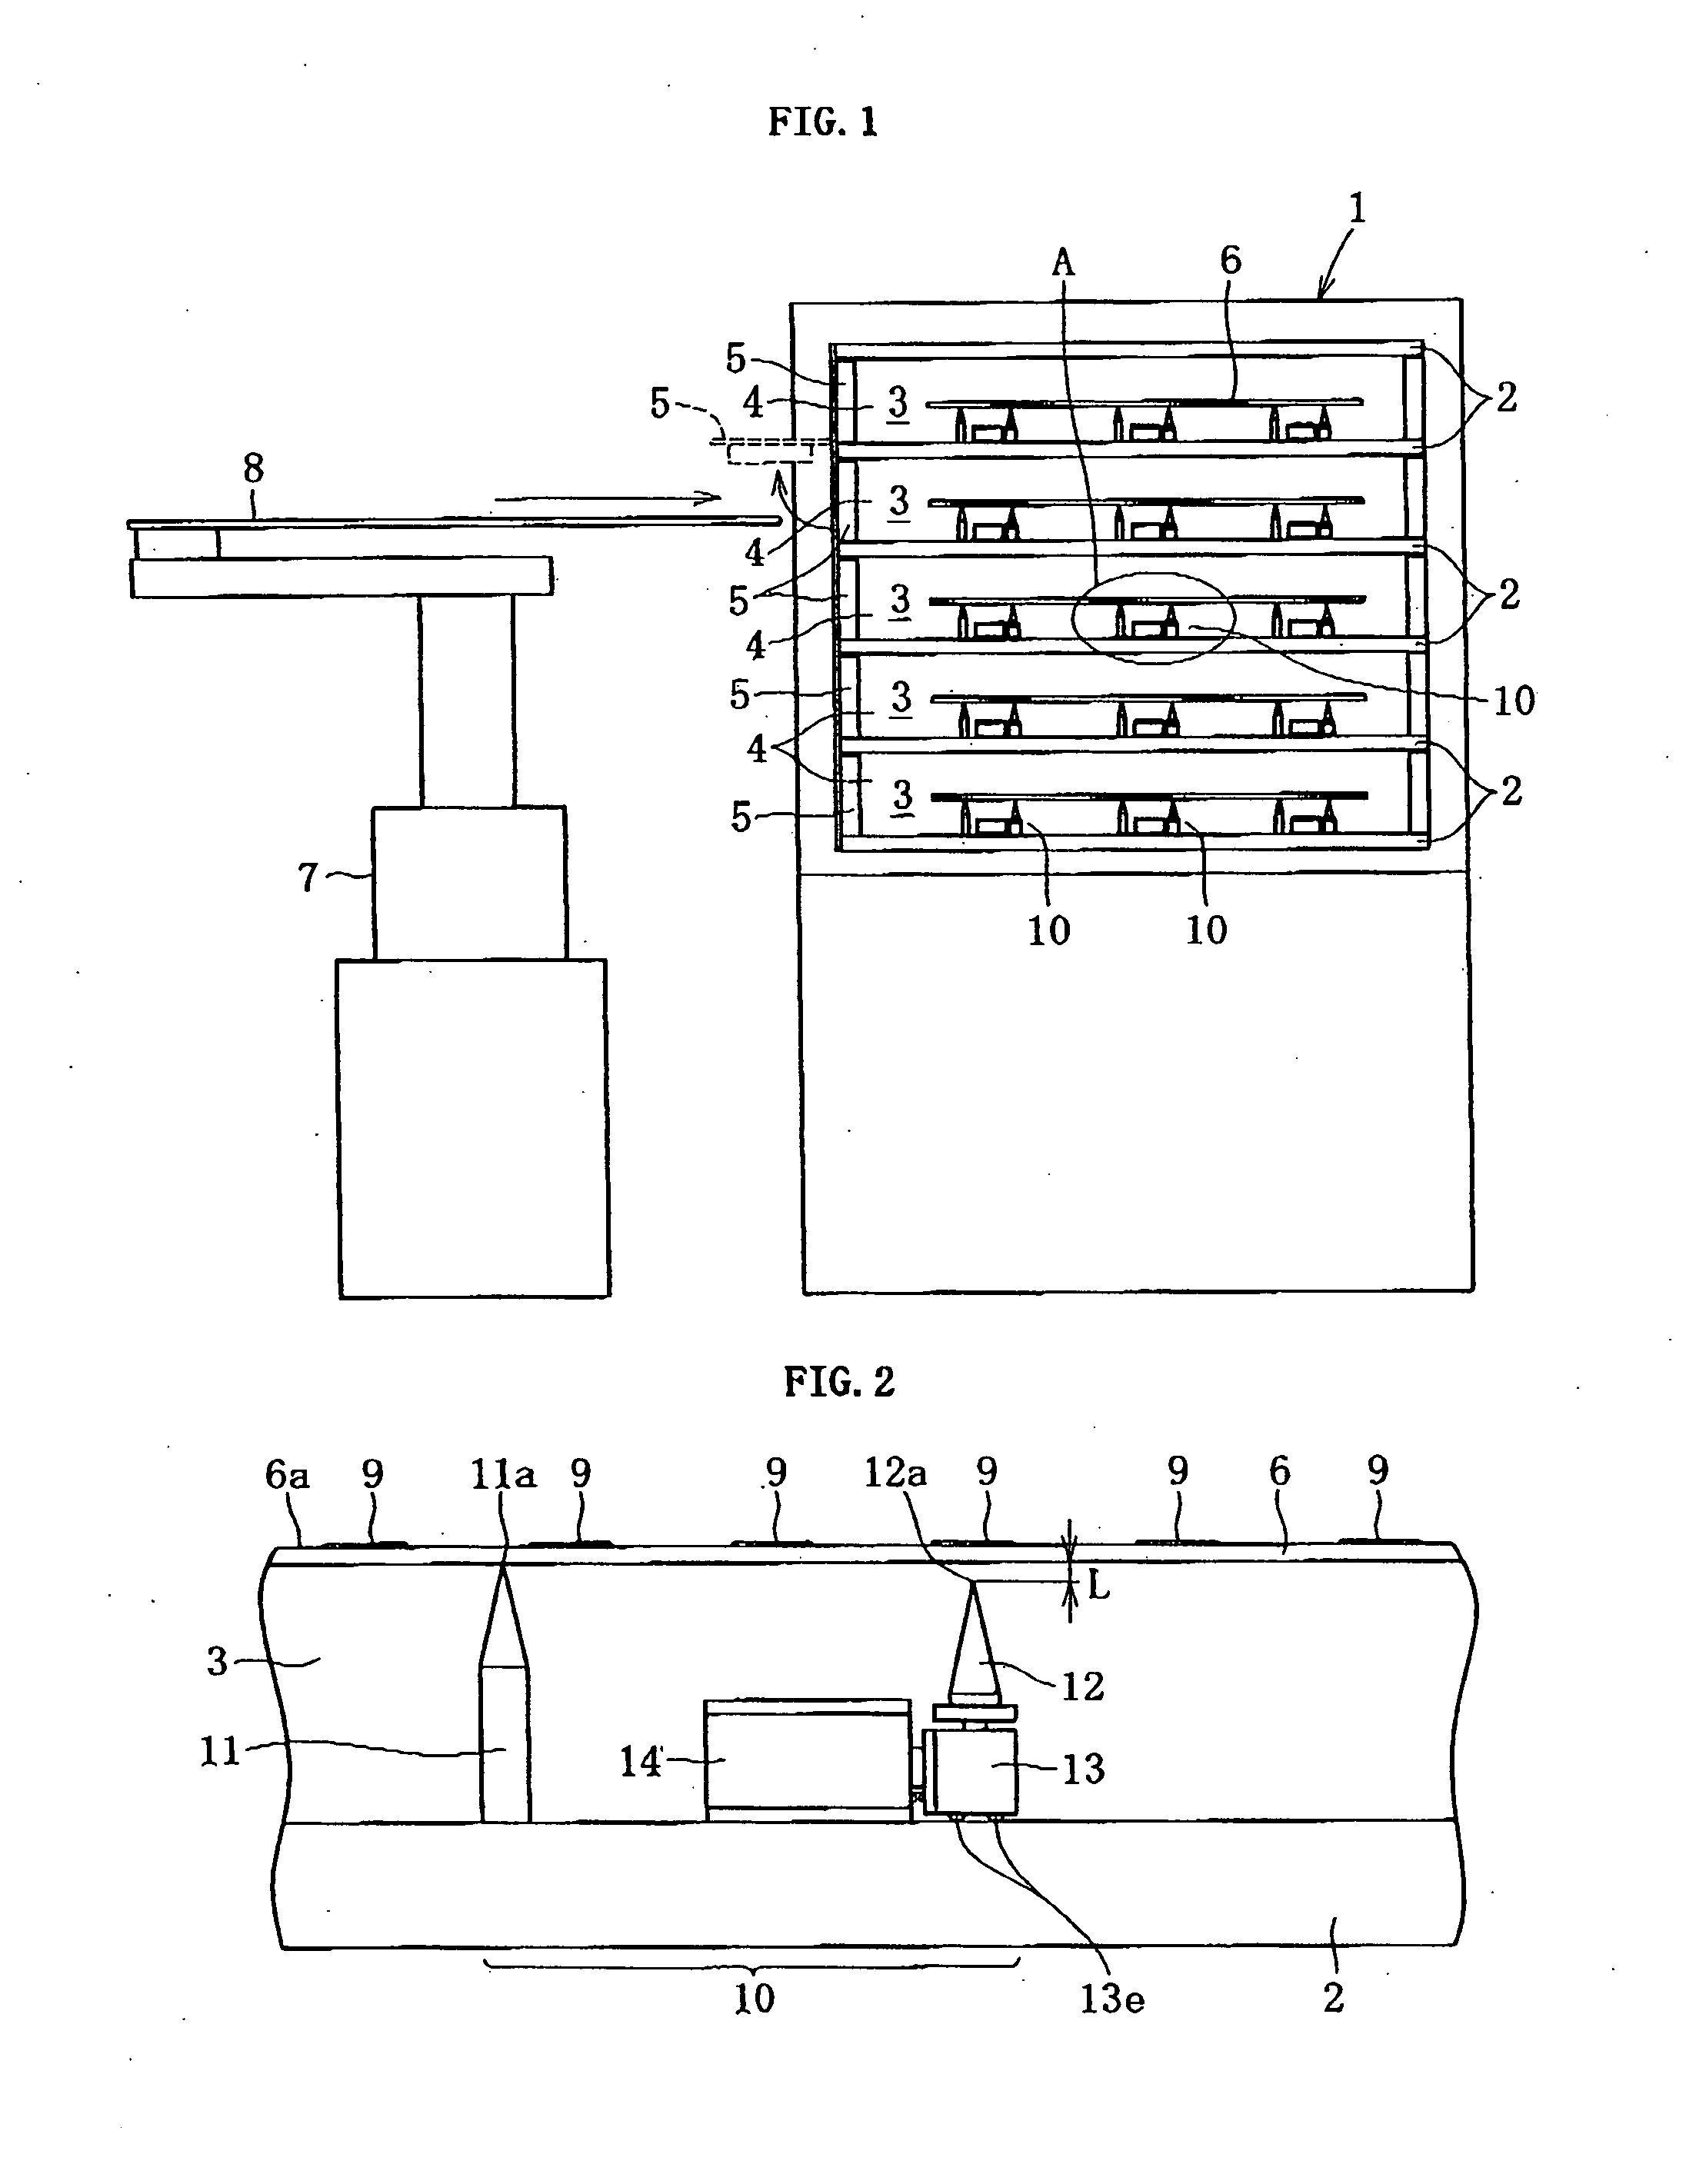 Drying furnace for cated film